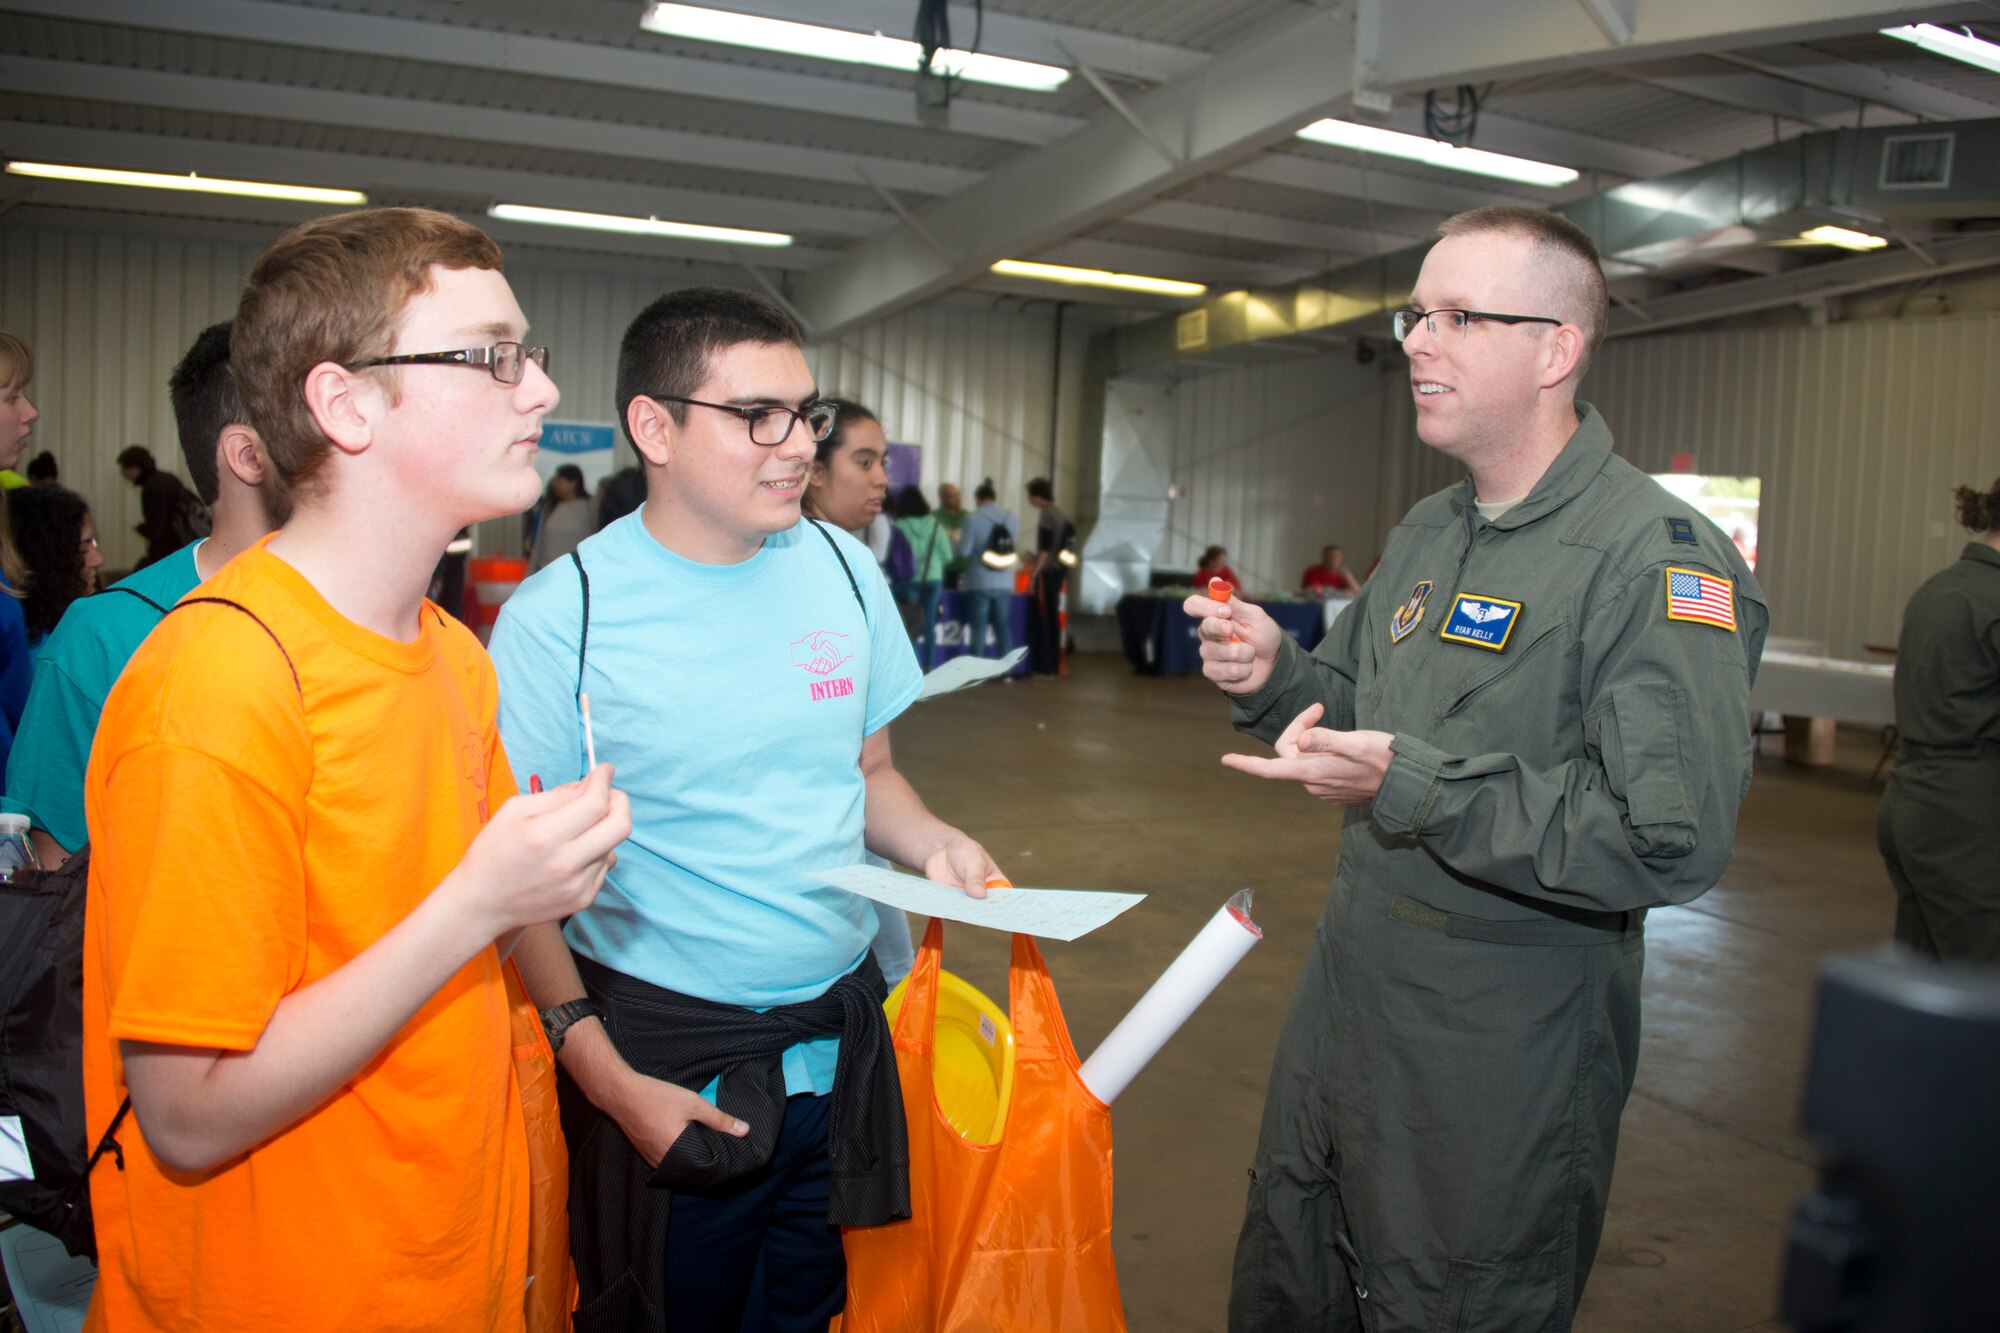 Wing members reach out to more than 1,000 students at career fair